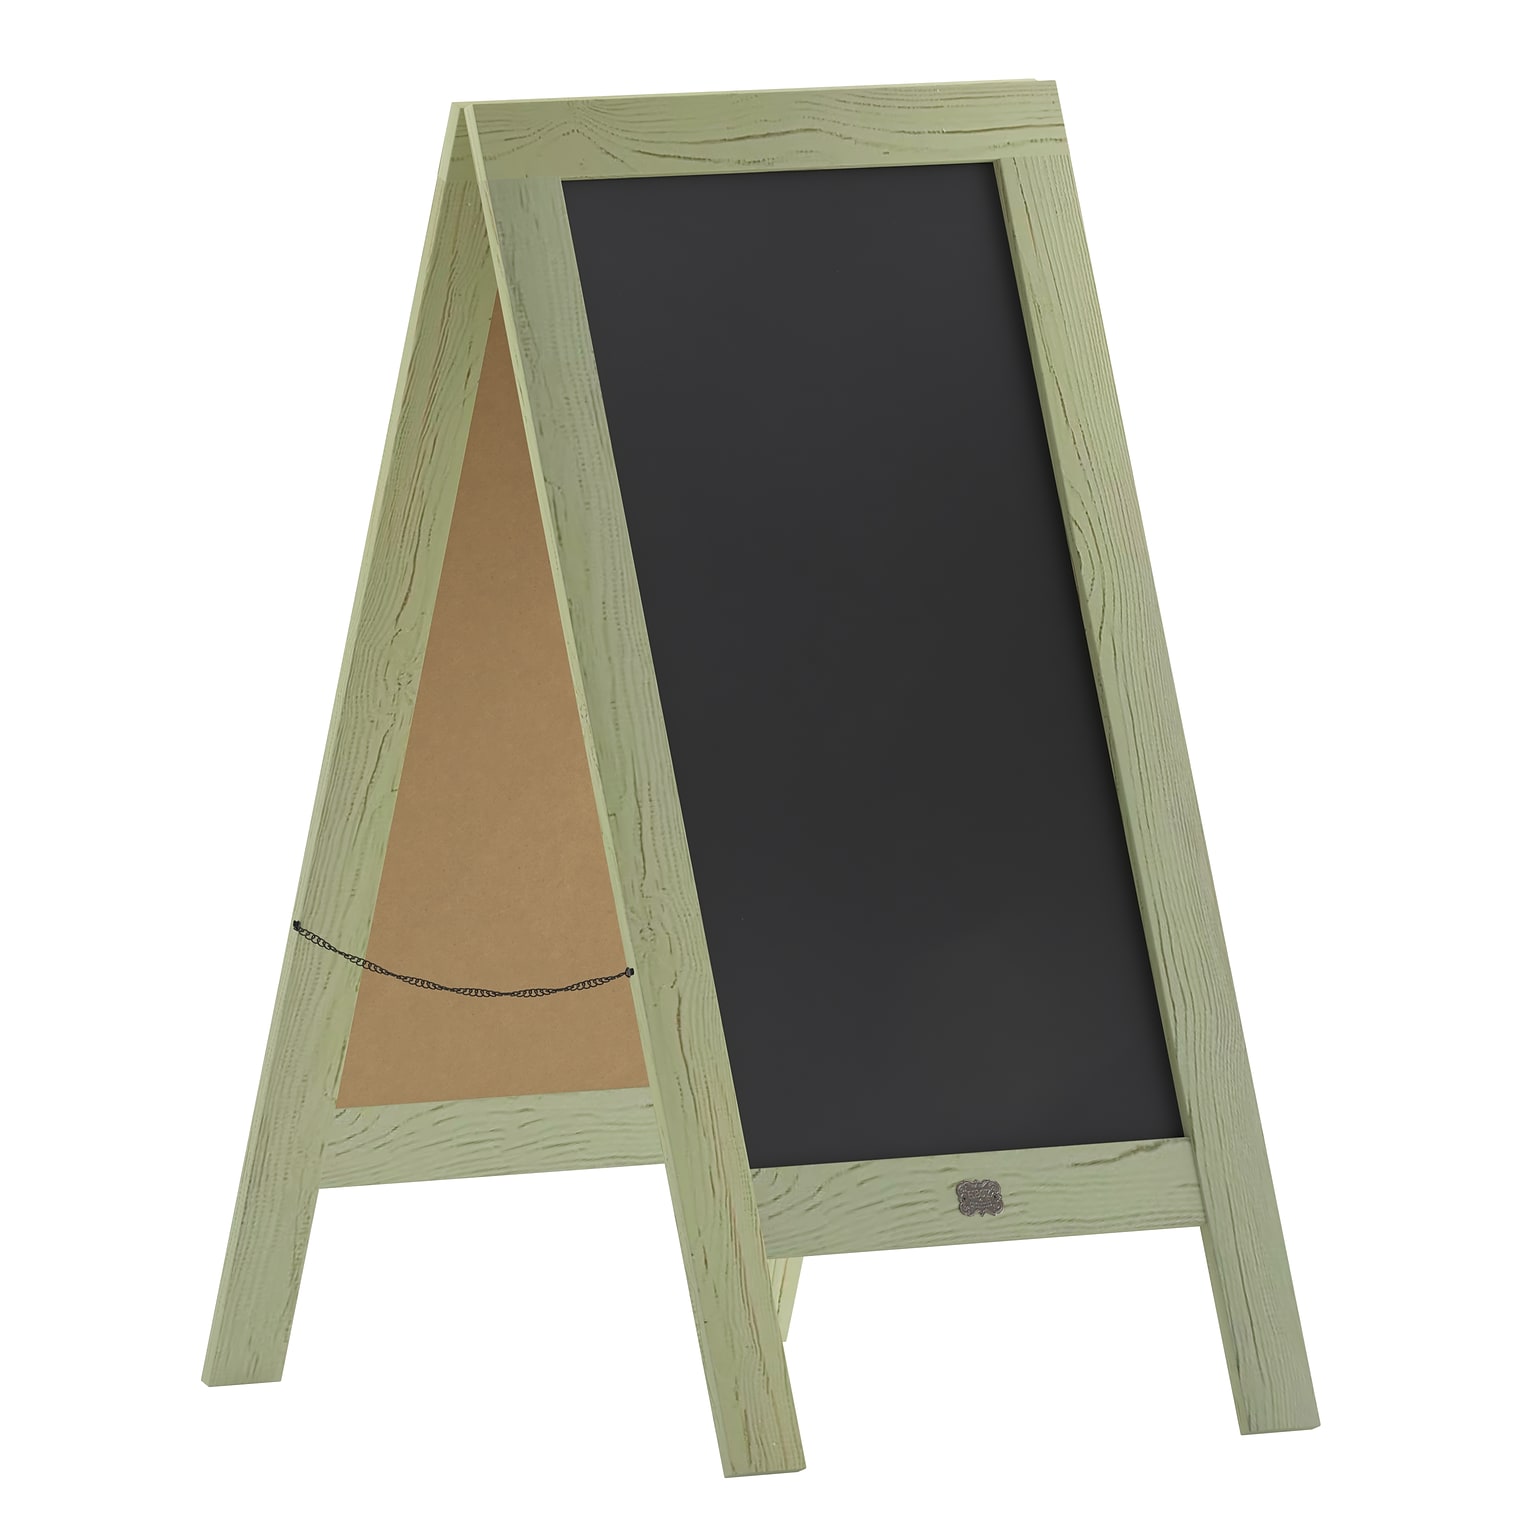 Flash Furniture Canterbury Vintage Wooden A-Frame Magnetic Indoor/Outdoor Chalkboard Sign, Green, 40 x 20 (HGWAGDI554315)